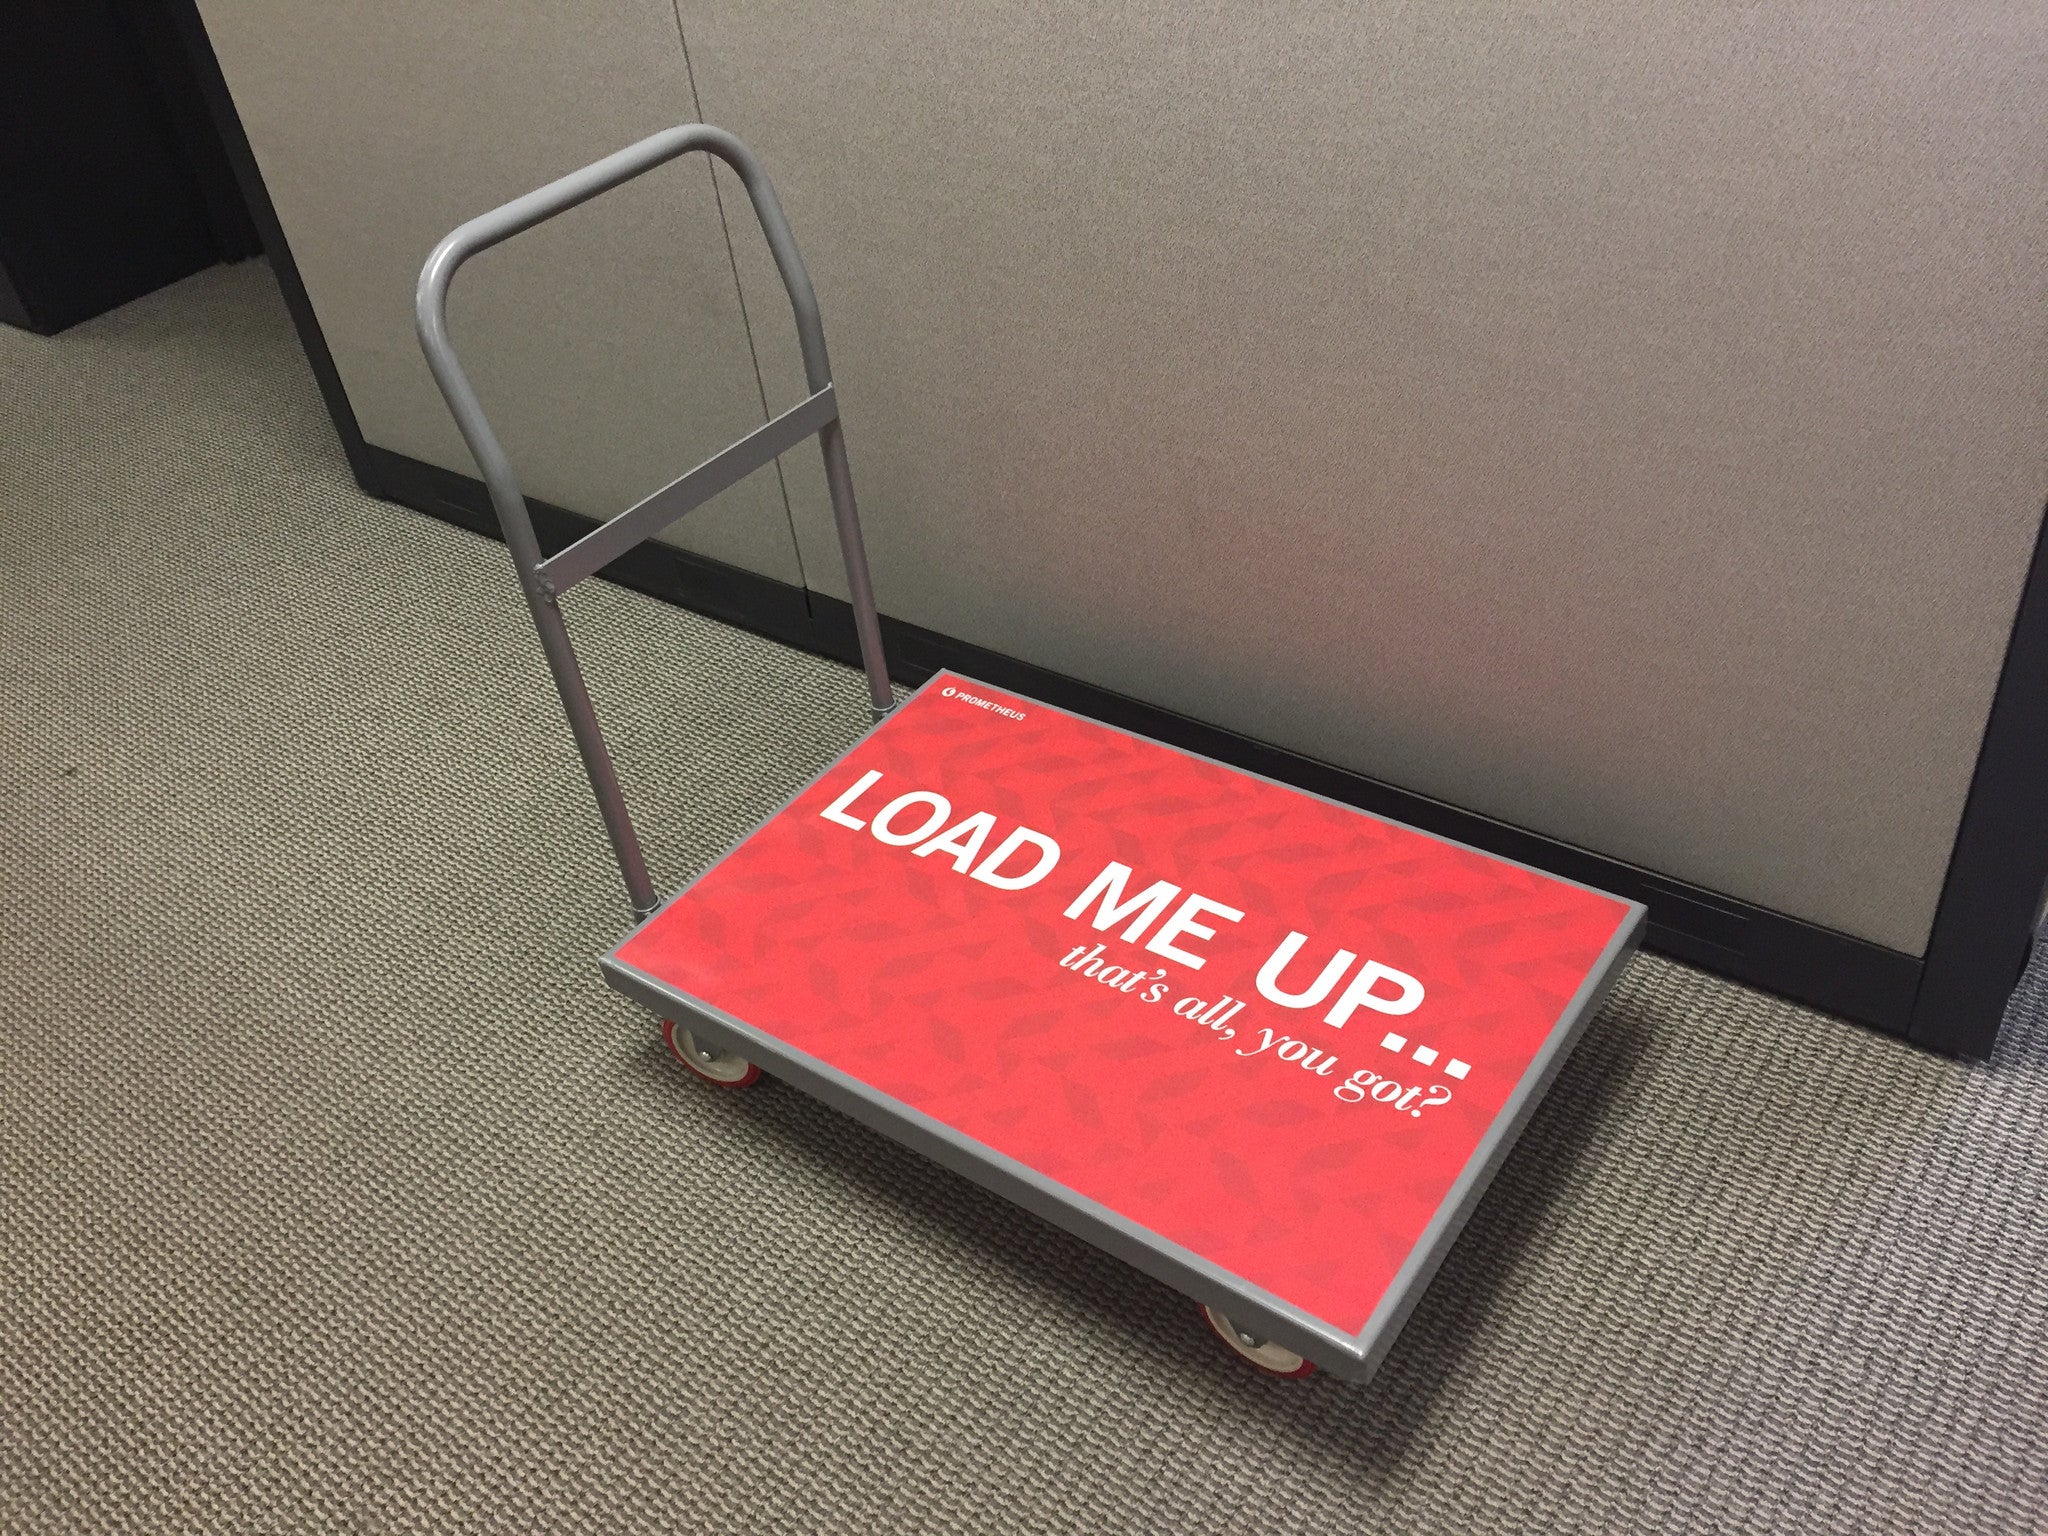 "Load Me Up" Push Cart Graphic